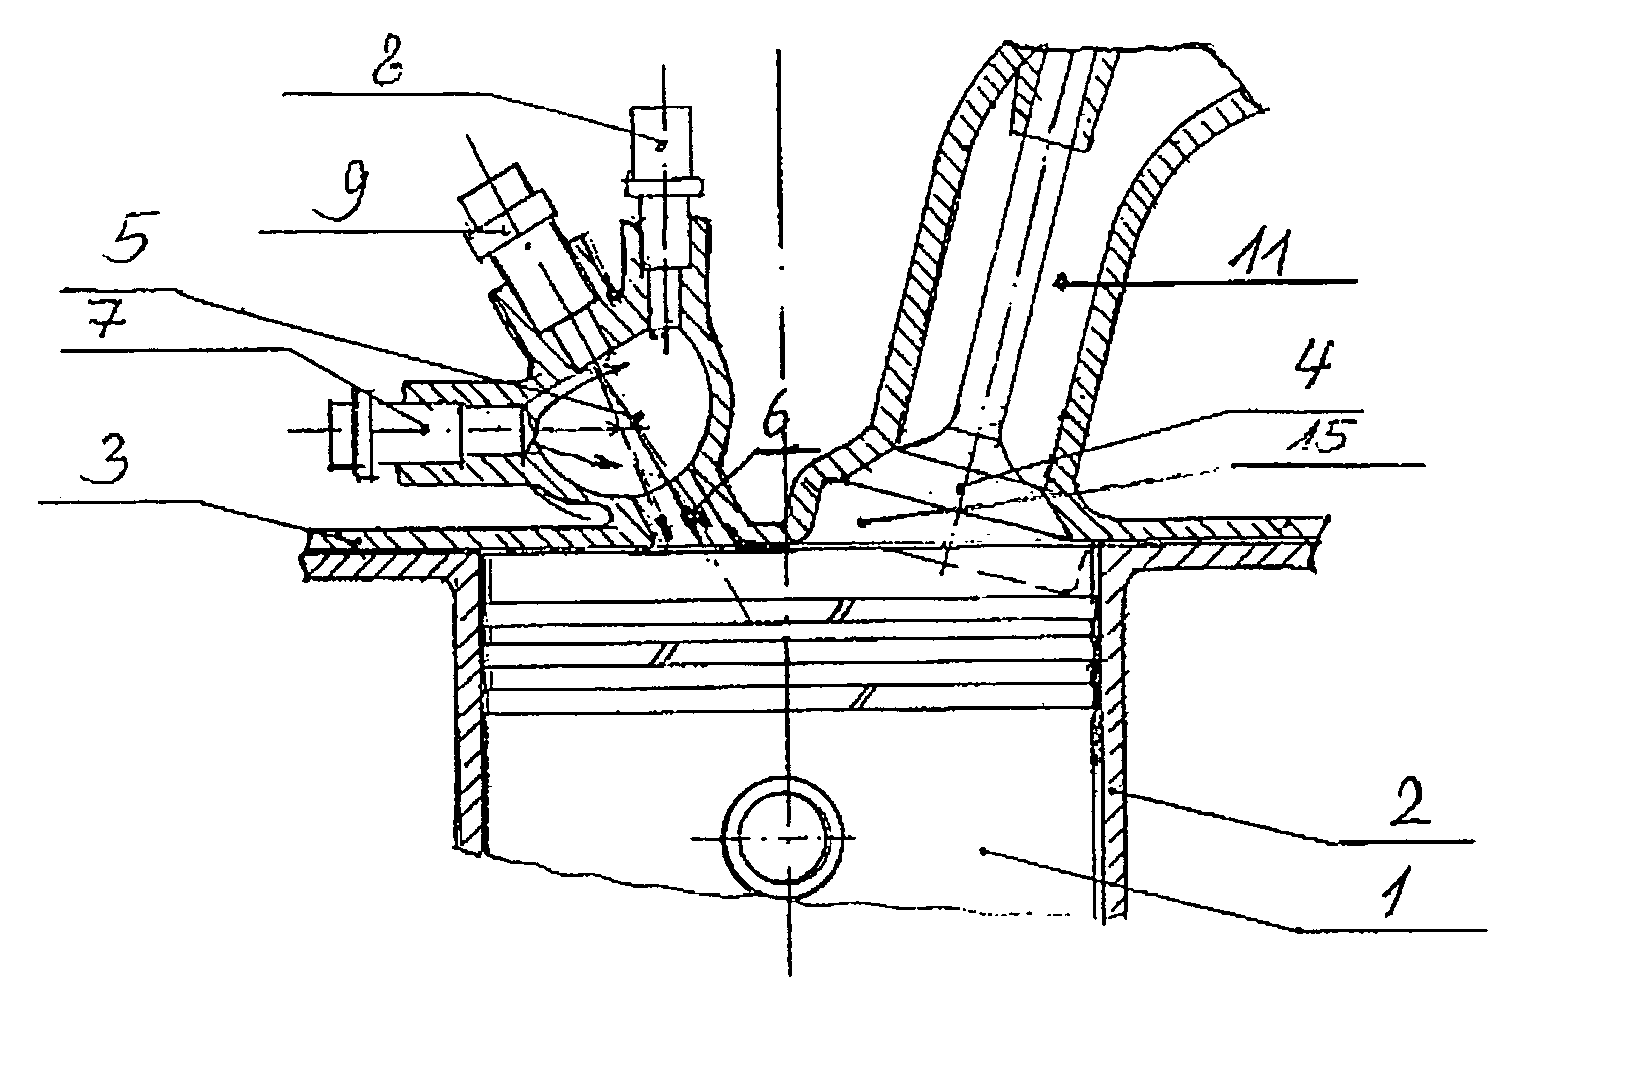 High compression spark-ignition engine with throttle control, externally supplied ignition, and direct fuel injection into a precombustion chamber